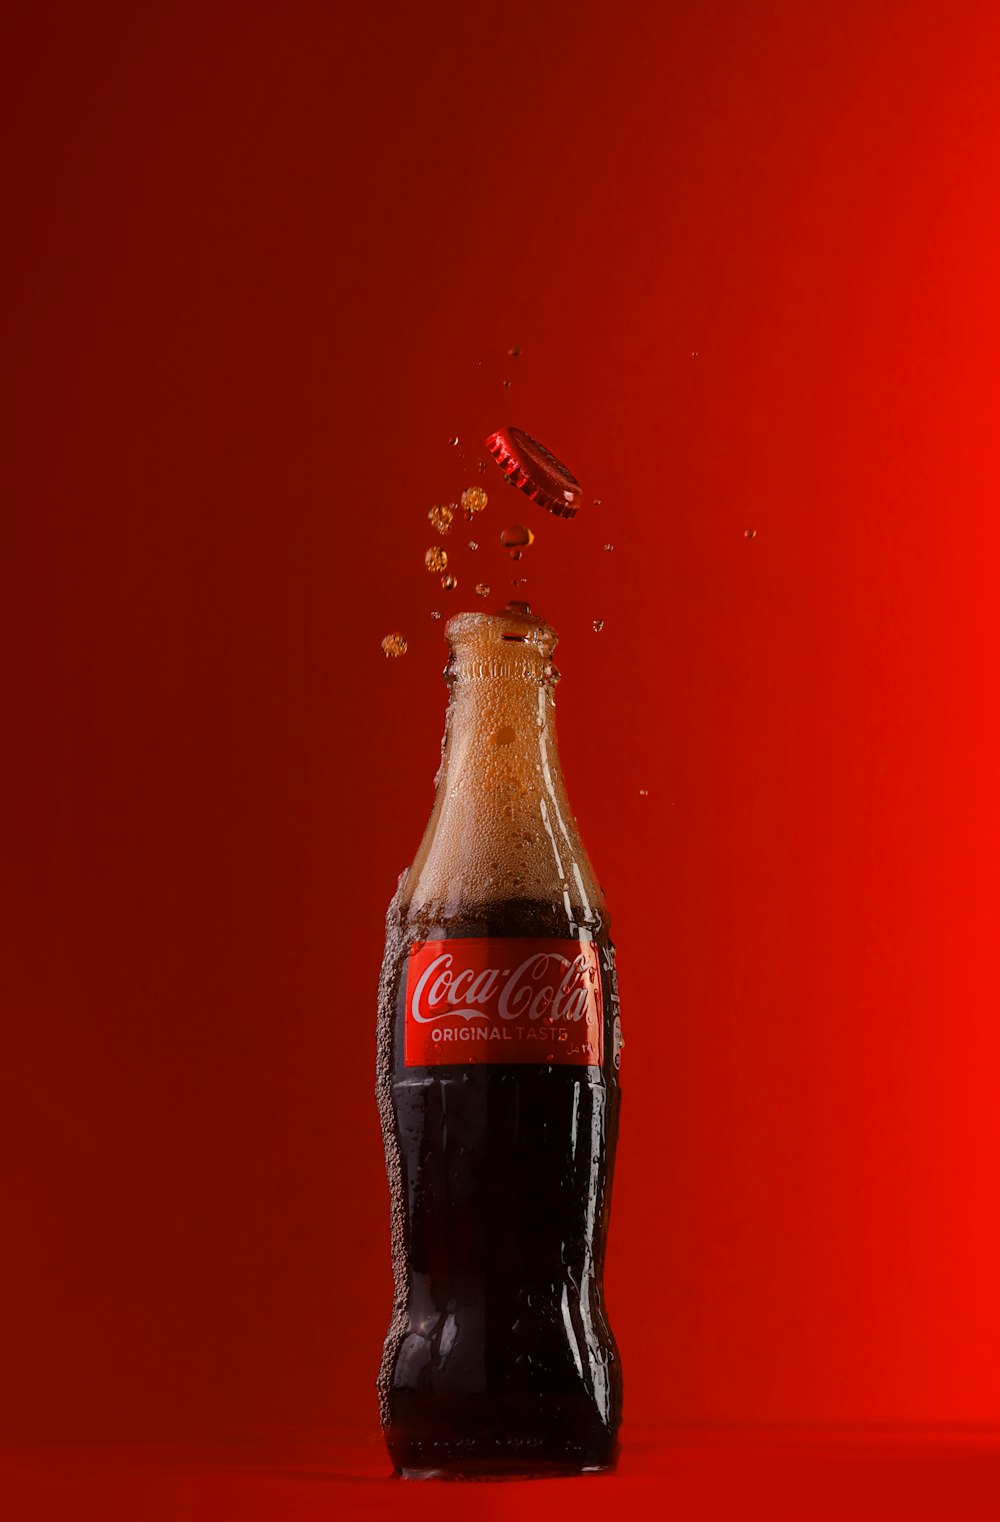 coca cola bottle on red textile